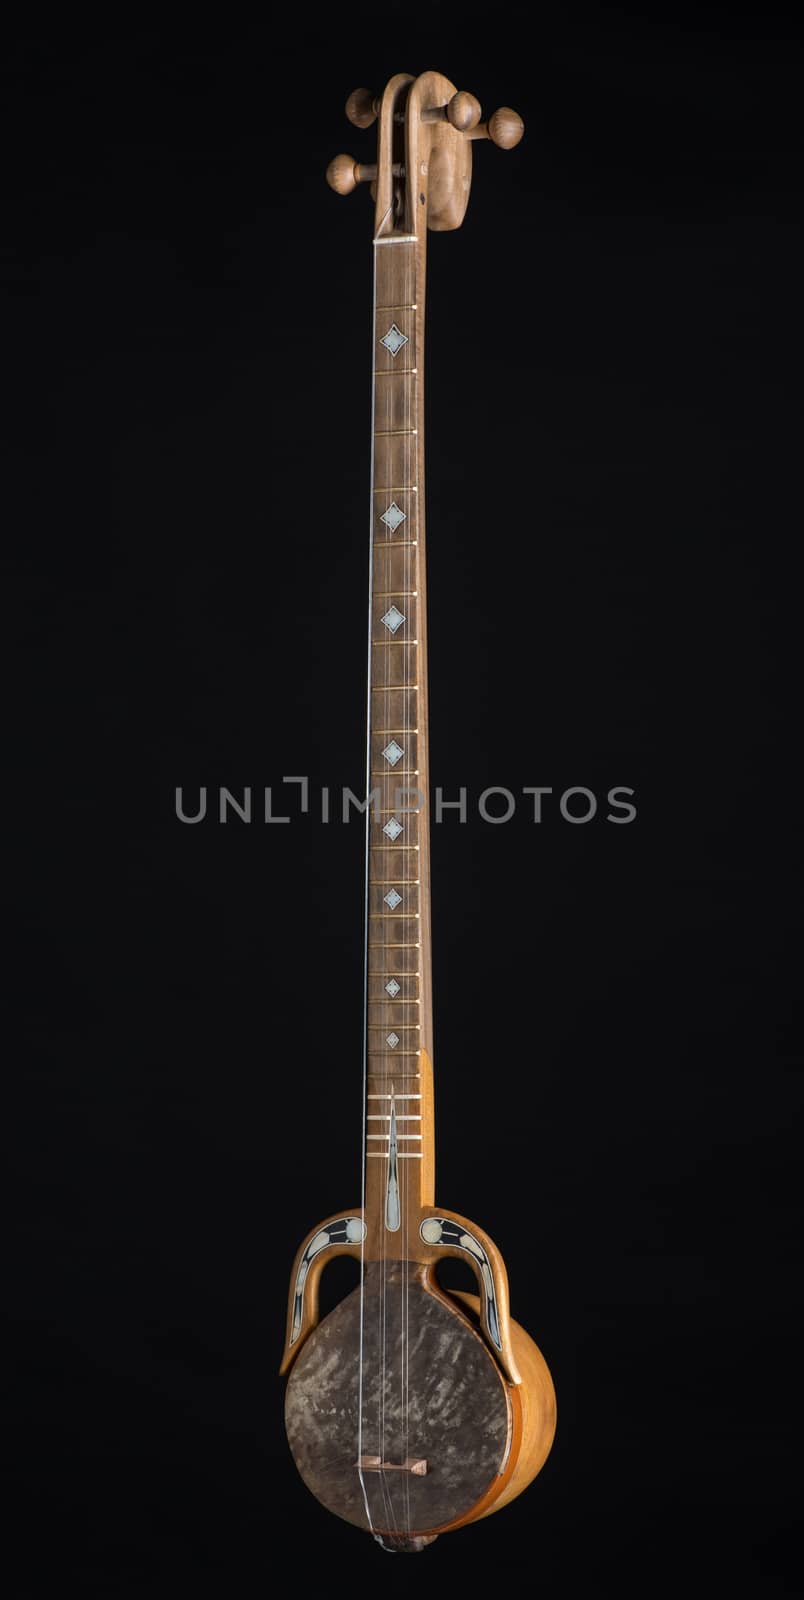 ancient Asian stringed musical instrument on black background with backlight